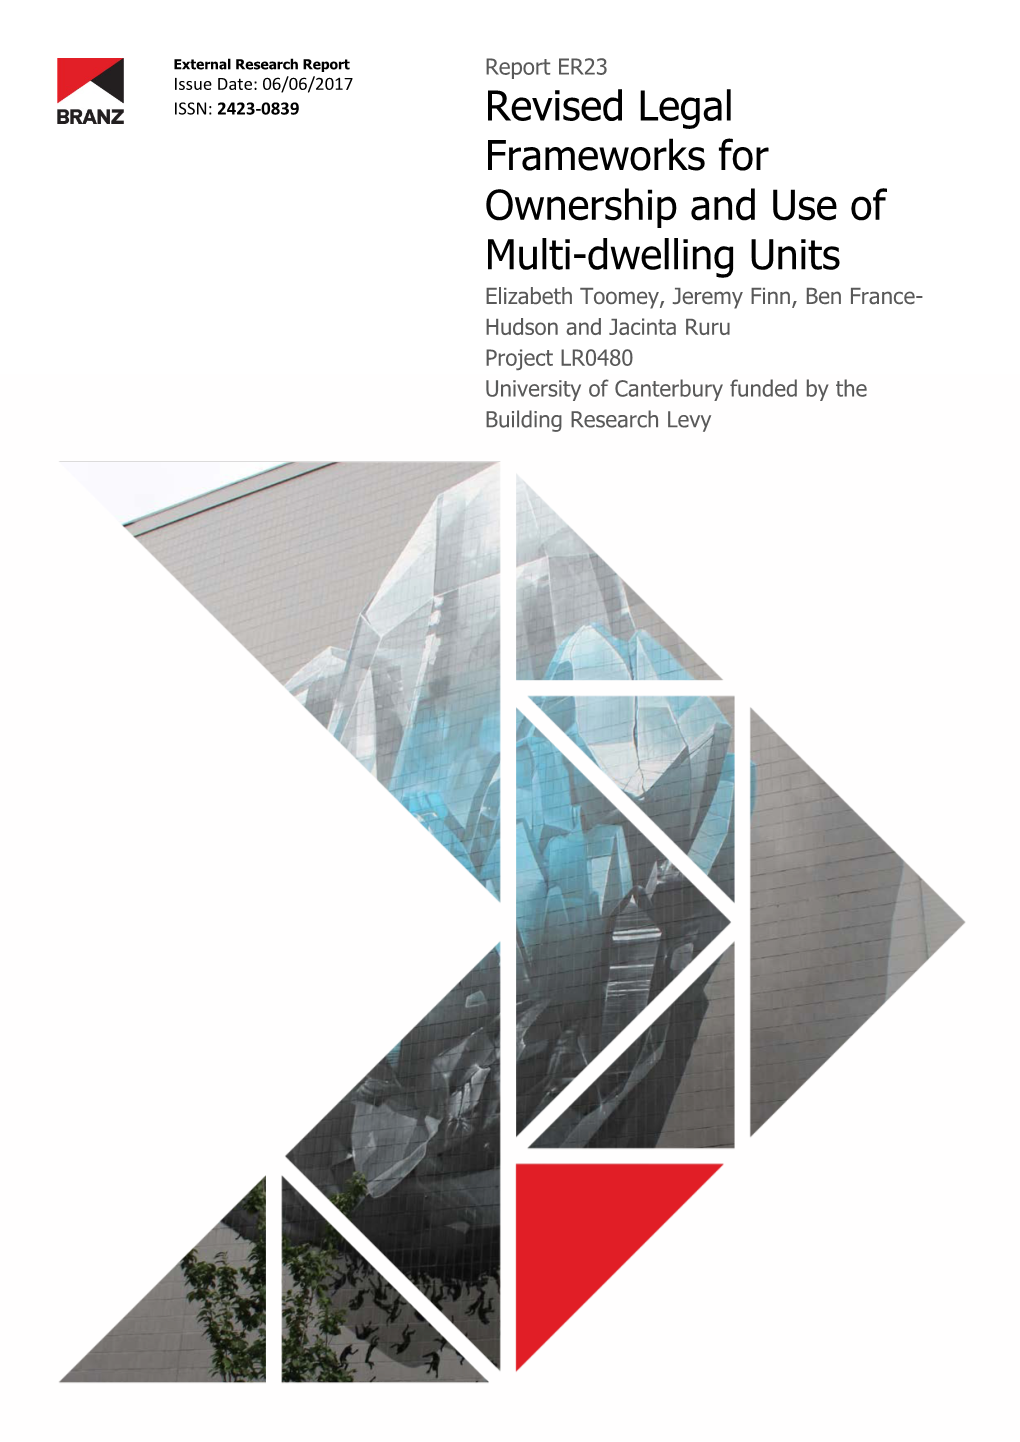 Revised Legal Frameworks for Ownership and Use of Multi-Dwelling Units